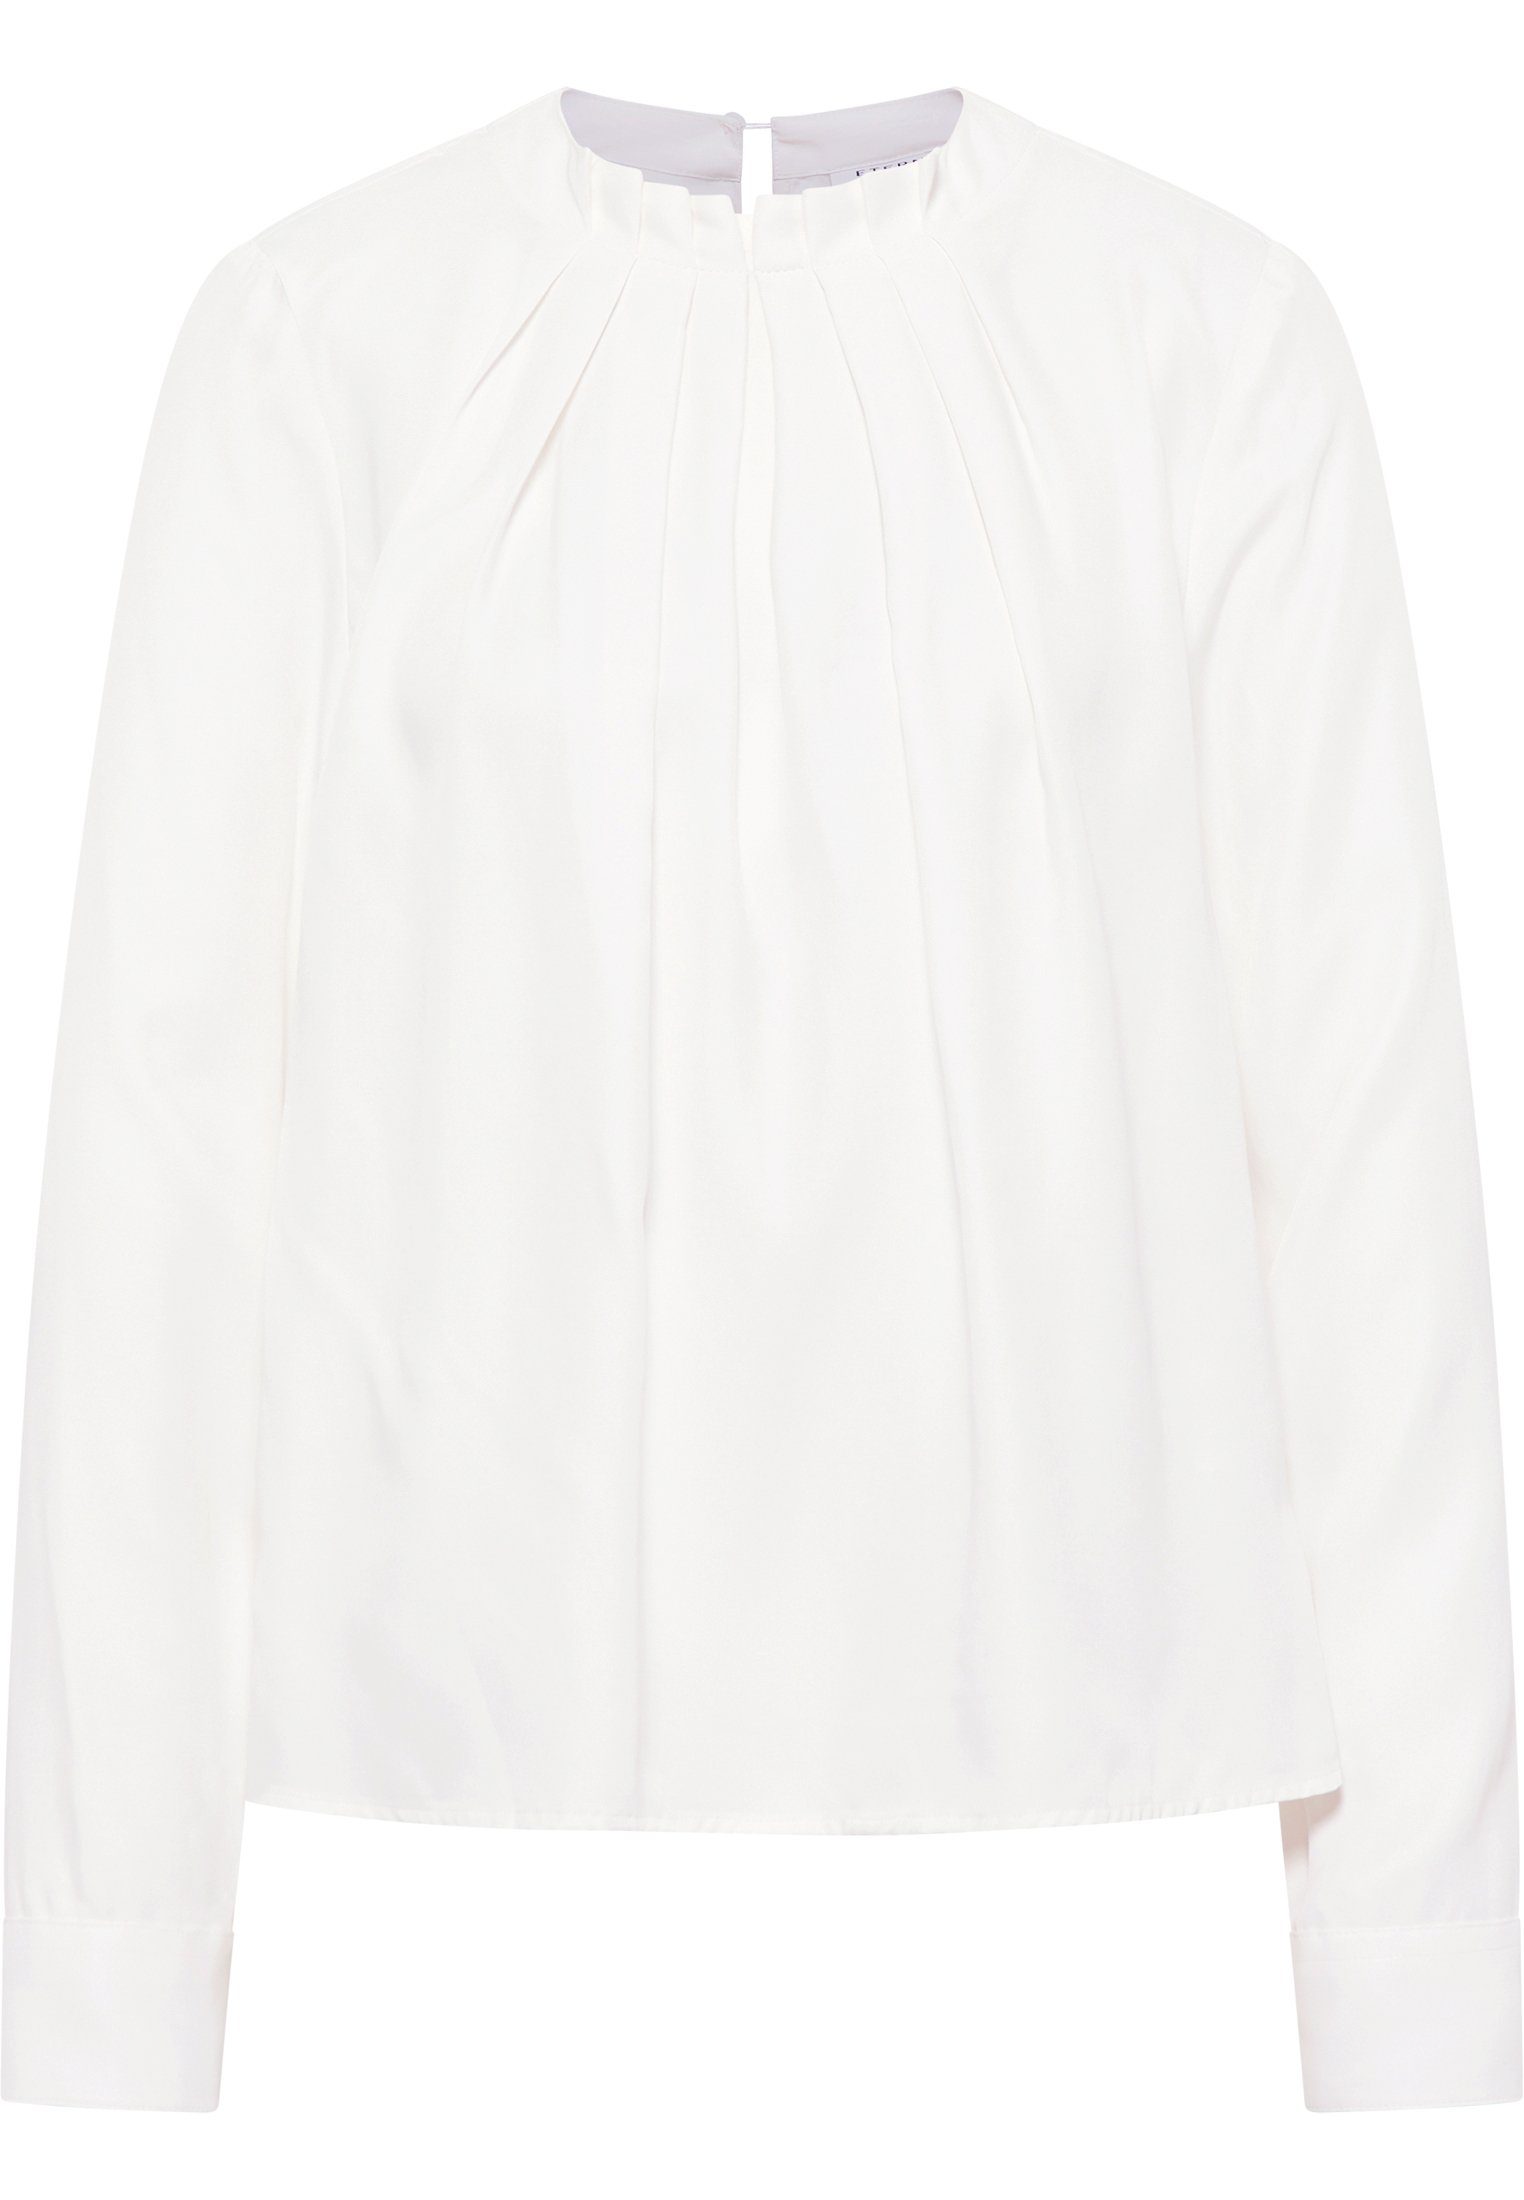 Shirtbluse Eterna FIT off-white LOOSE